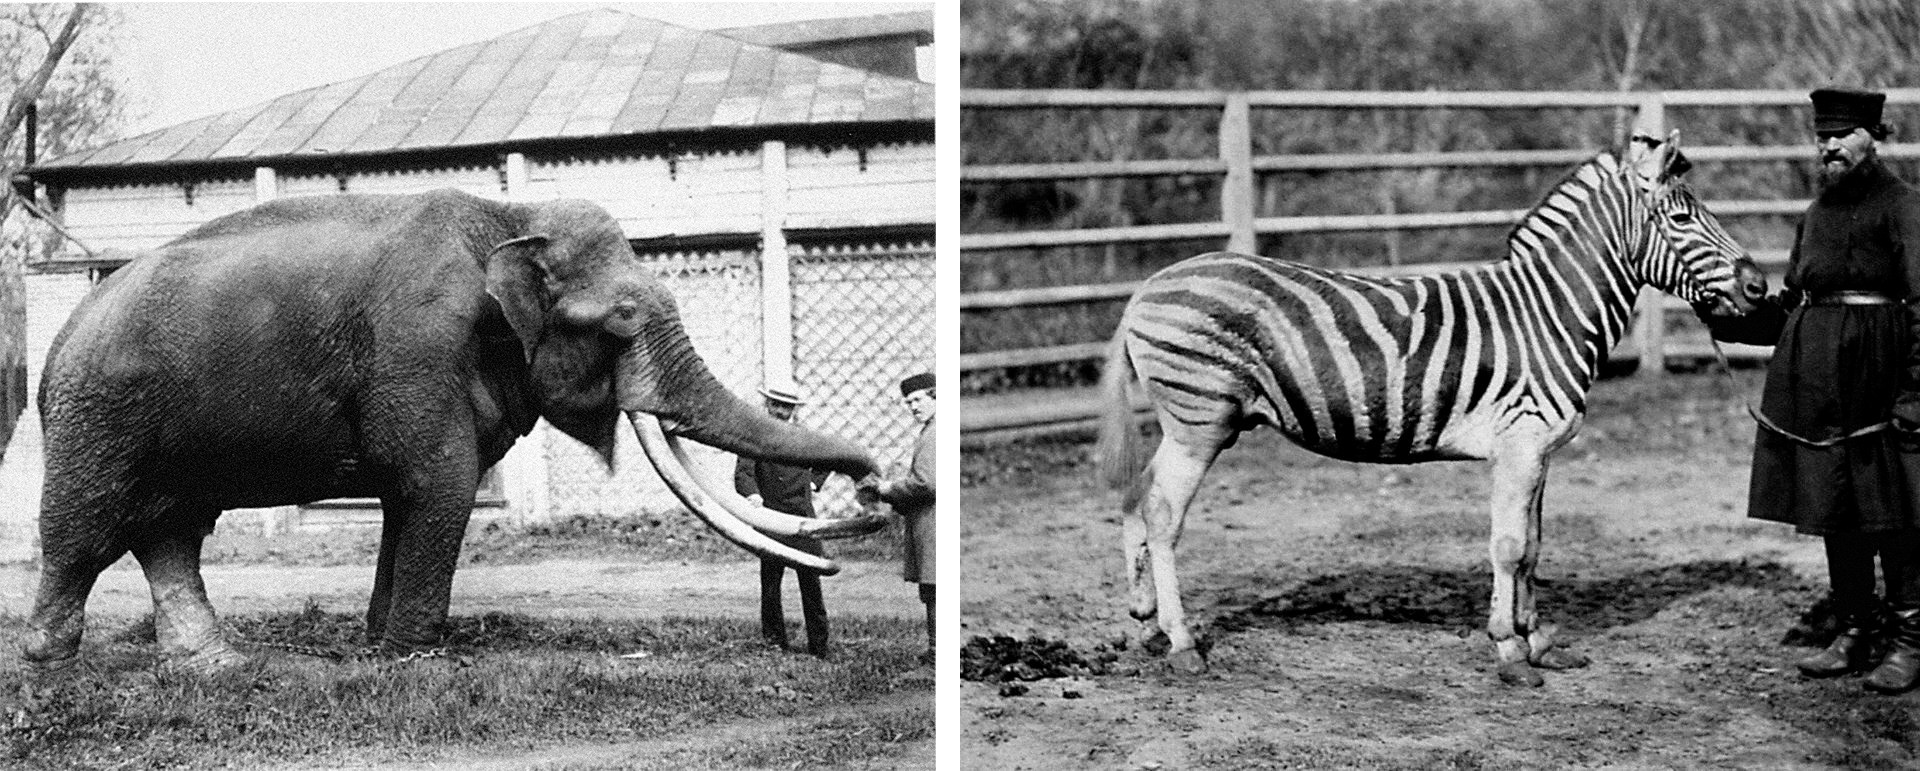 An Asian elephant was donated by Tsar Alexander II, and a zebra was received from an Egyptian ruler